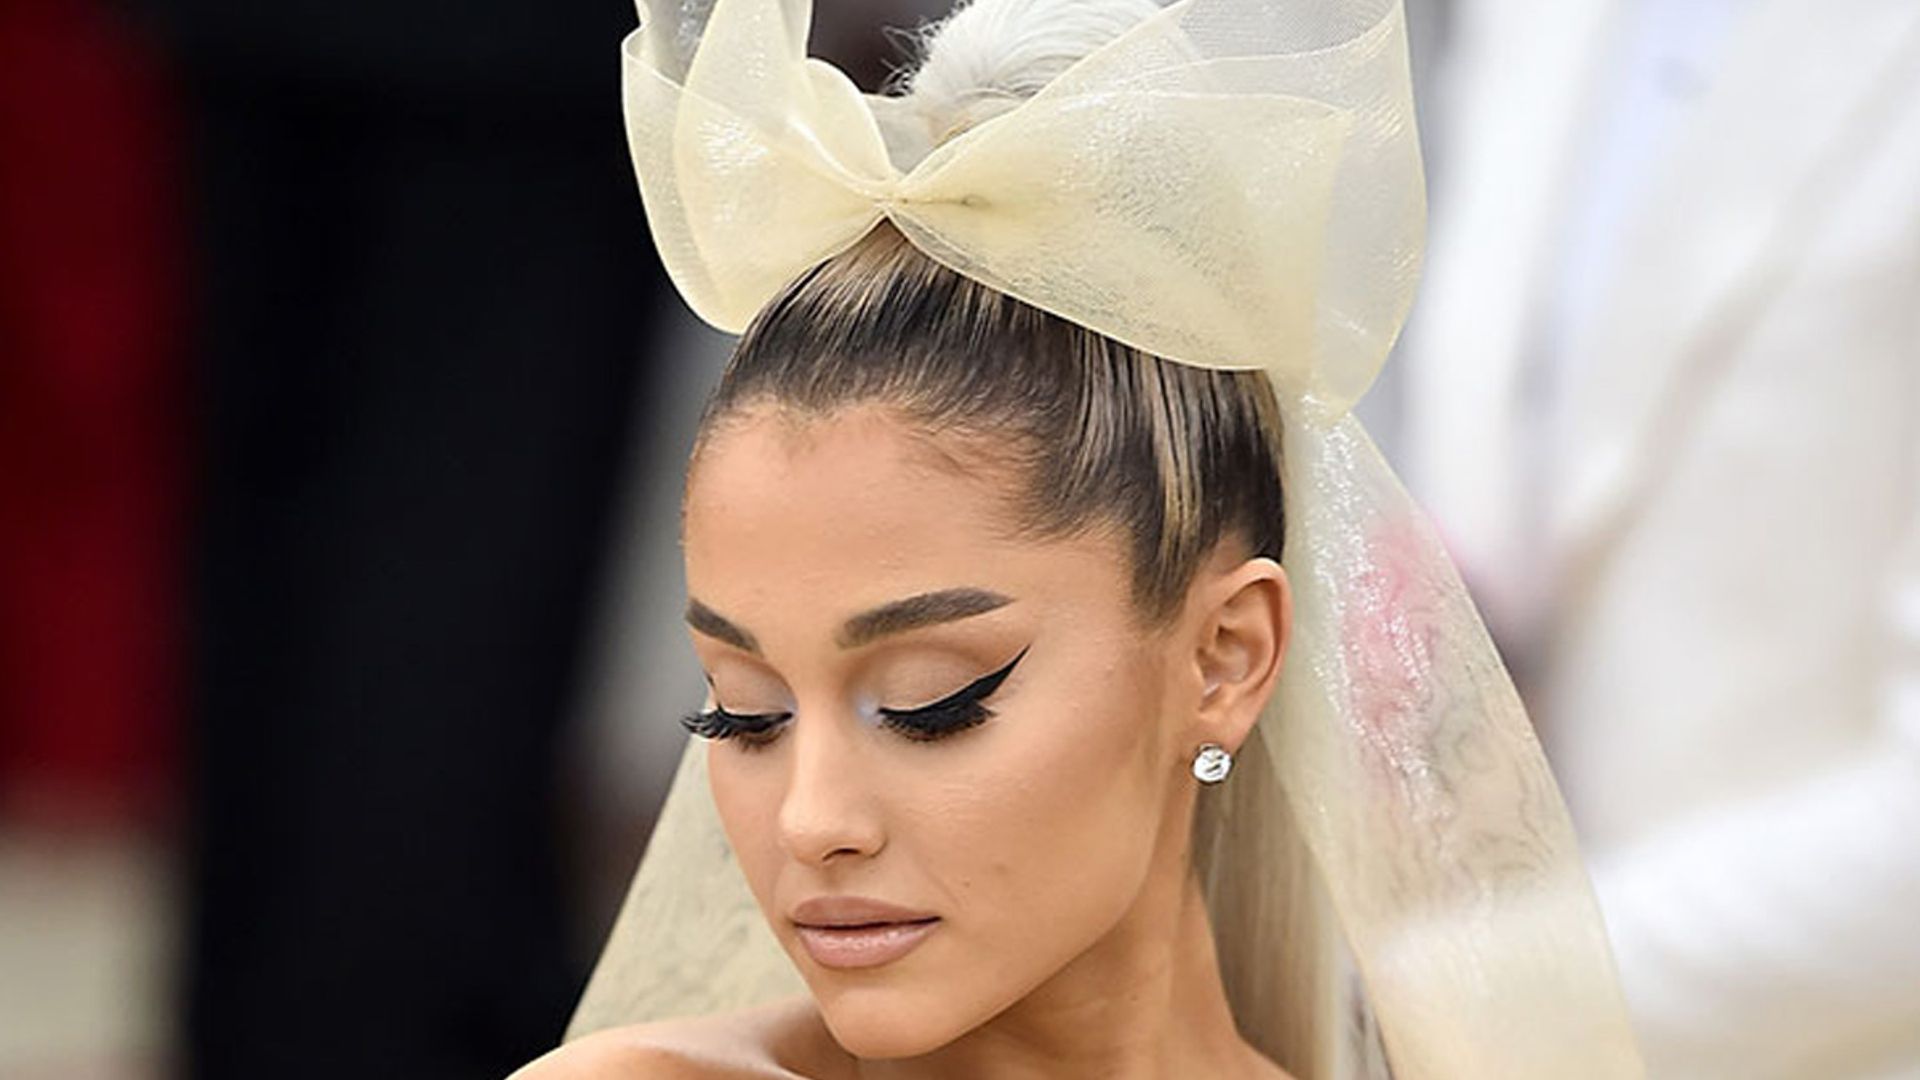 Ariana Grande divides fans with risque bridesmaid outfit at brother's wedding